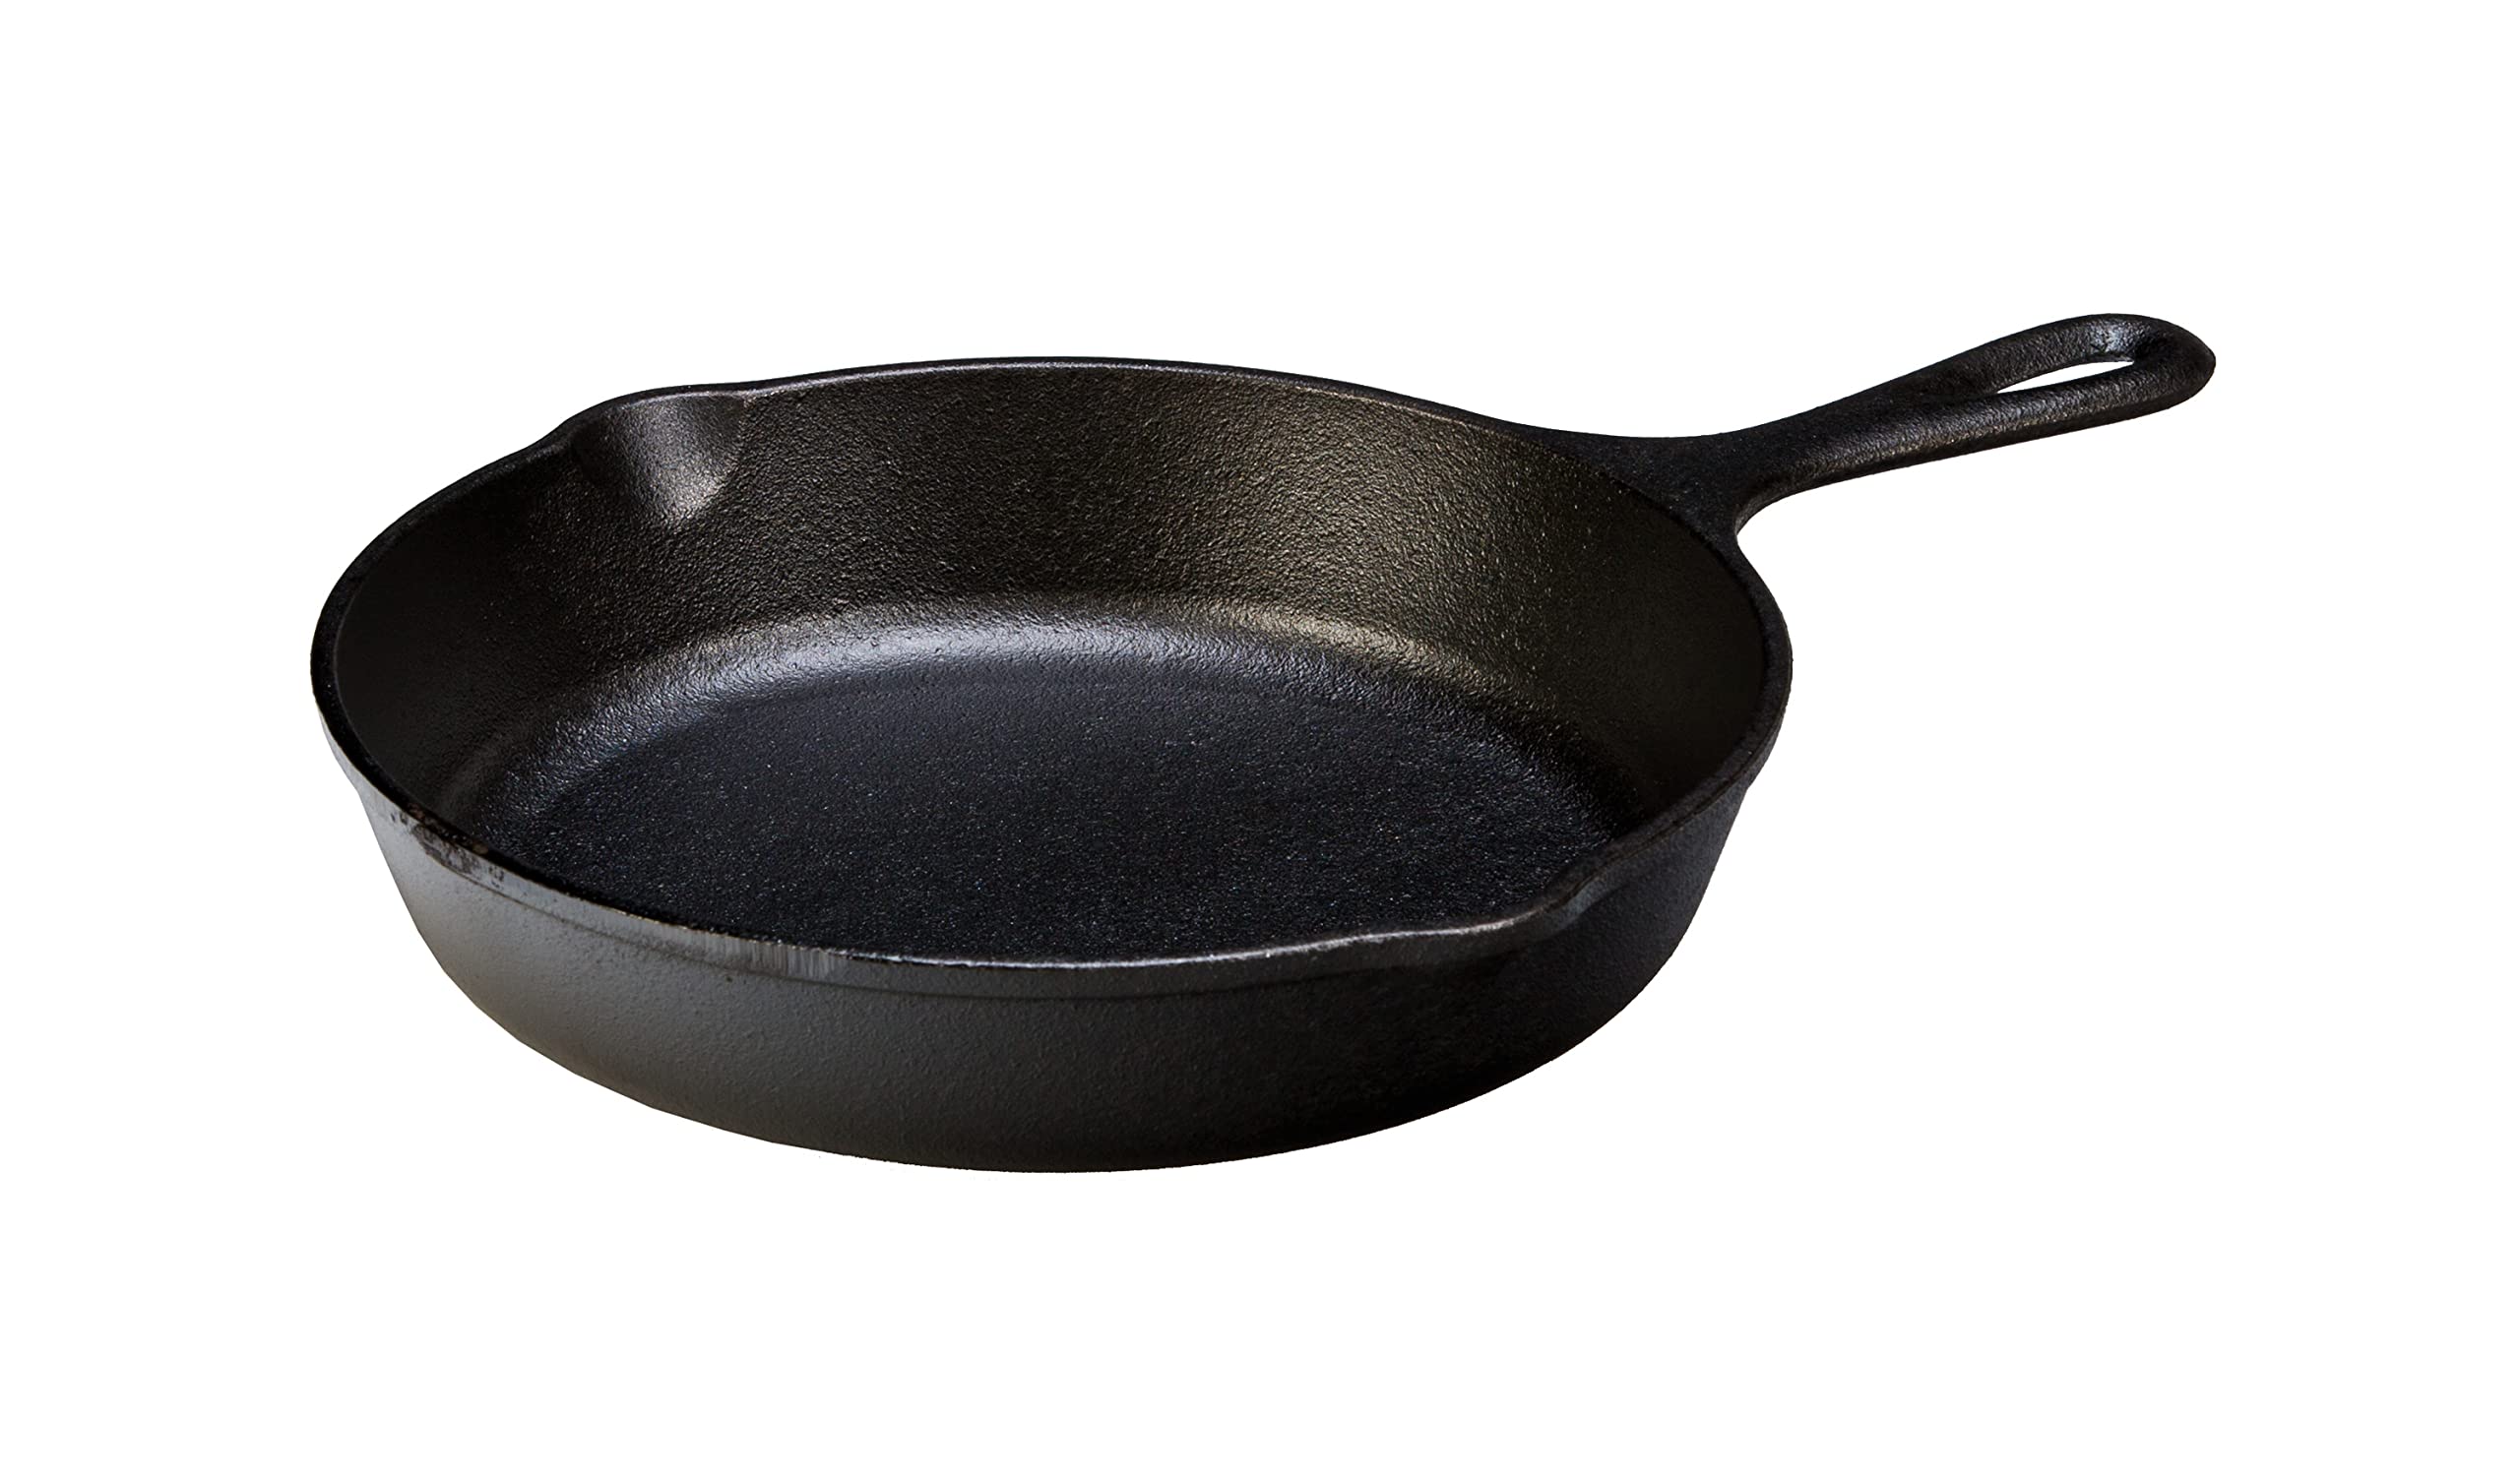 Lodge 9 Inch Cast Iron Pre-Seasoned Skillet – Signature Teardrop Handle - Use in the Oven, on the Stove, on the Grill, or Over a Campfire, Black